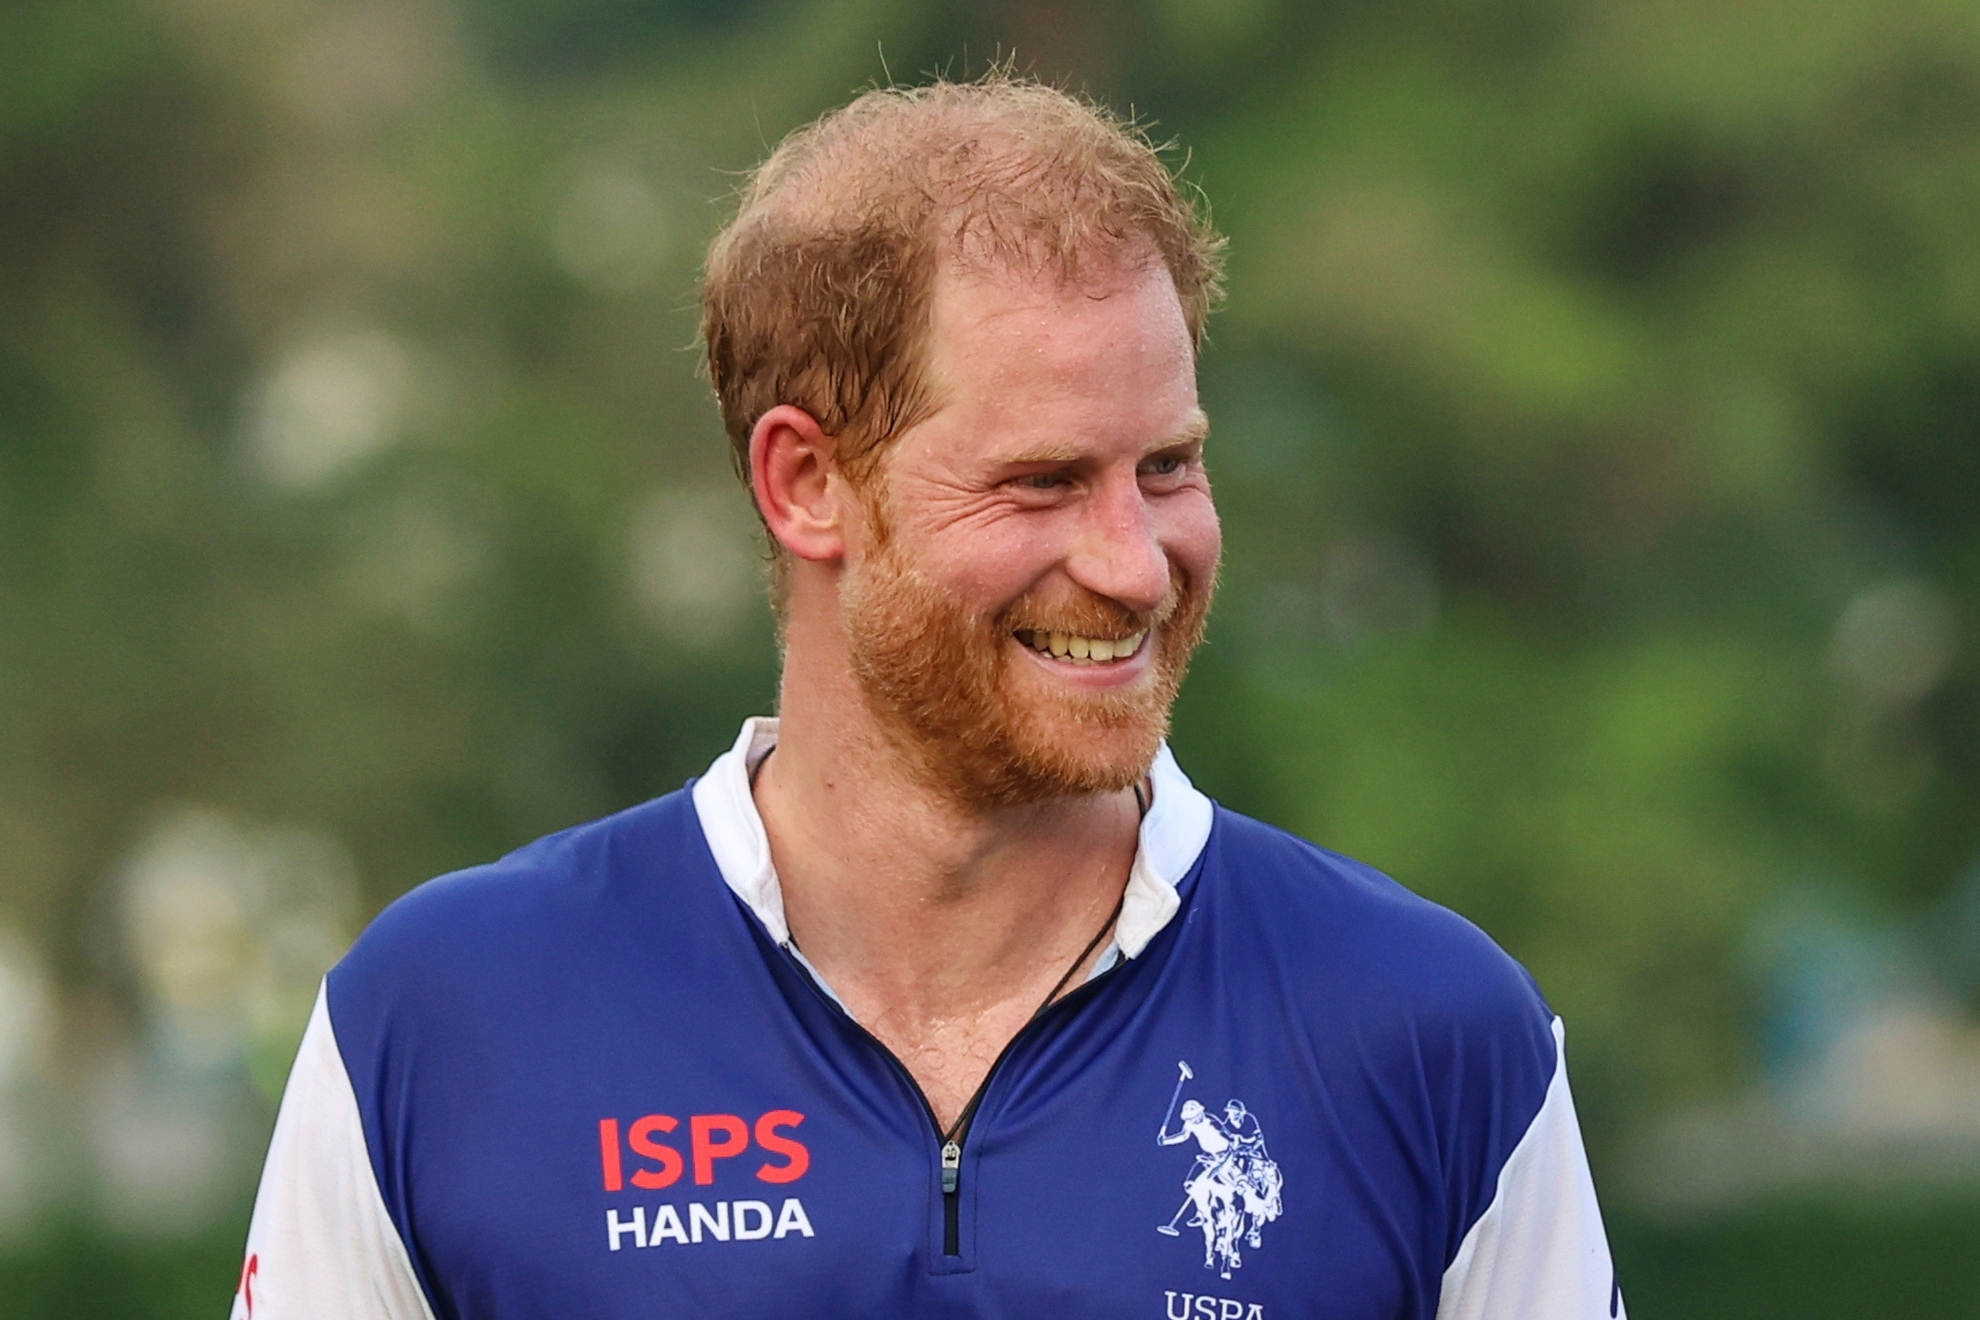 Prince Harry's new hair plugs might just be the crowning moment of his life